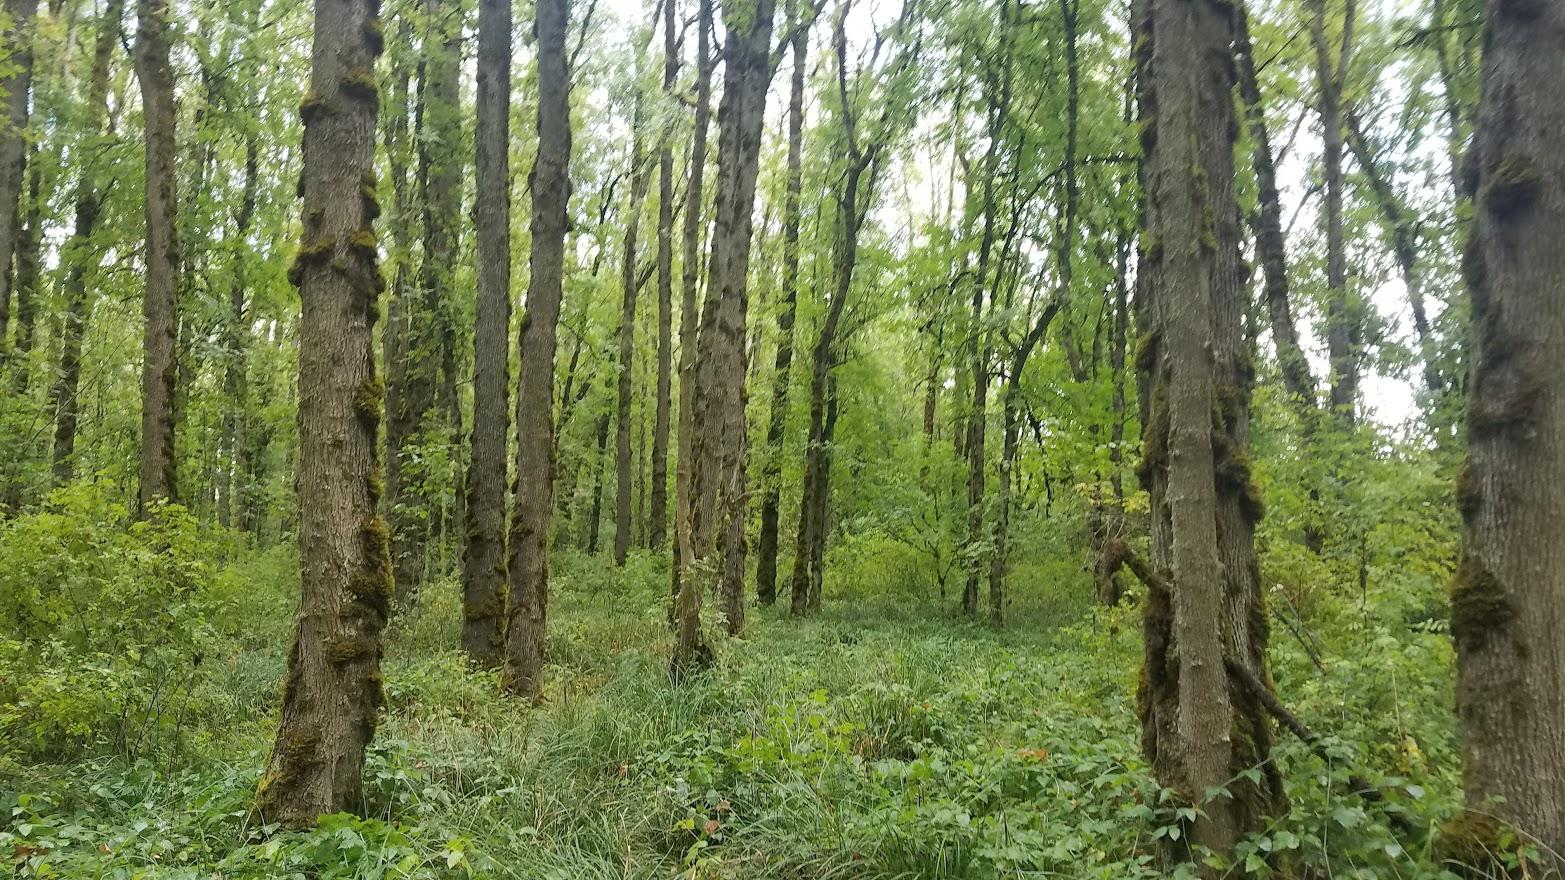 A stand of many ash trees